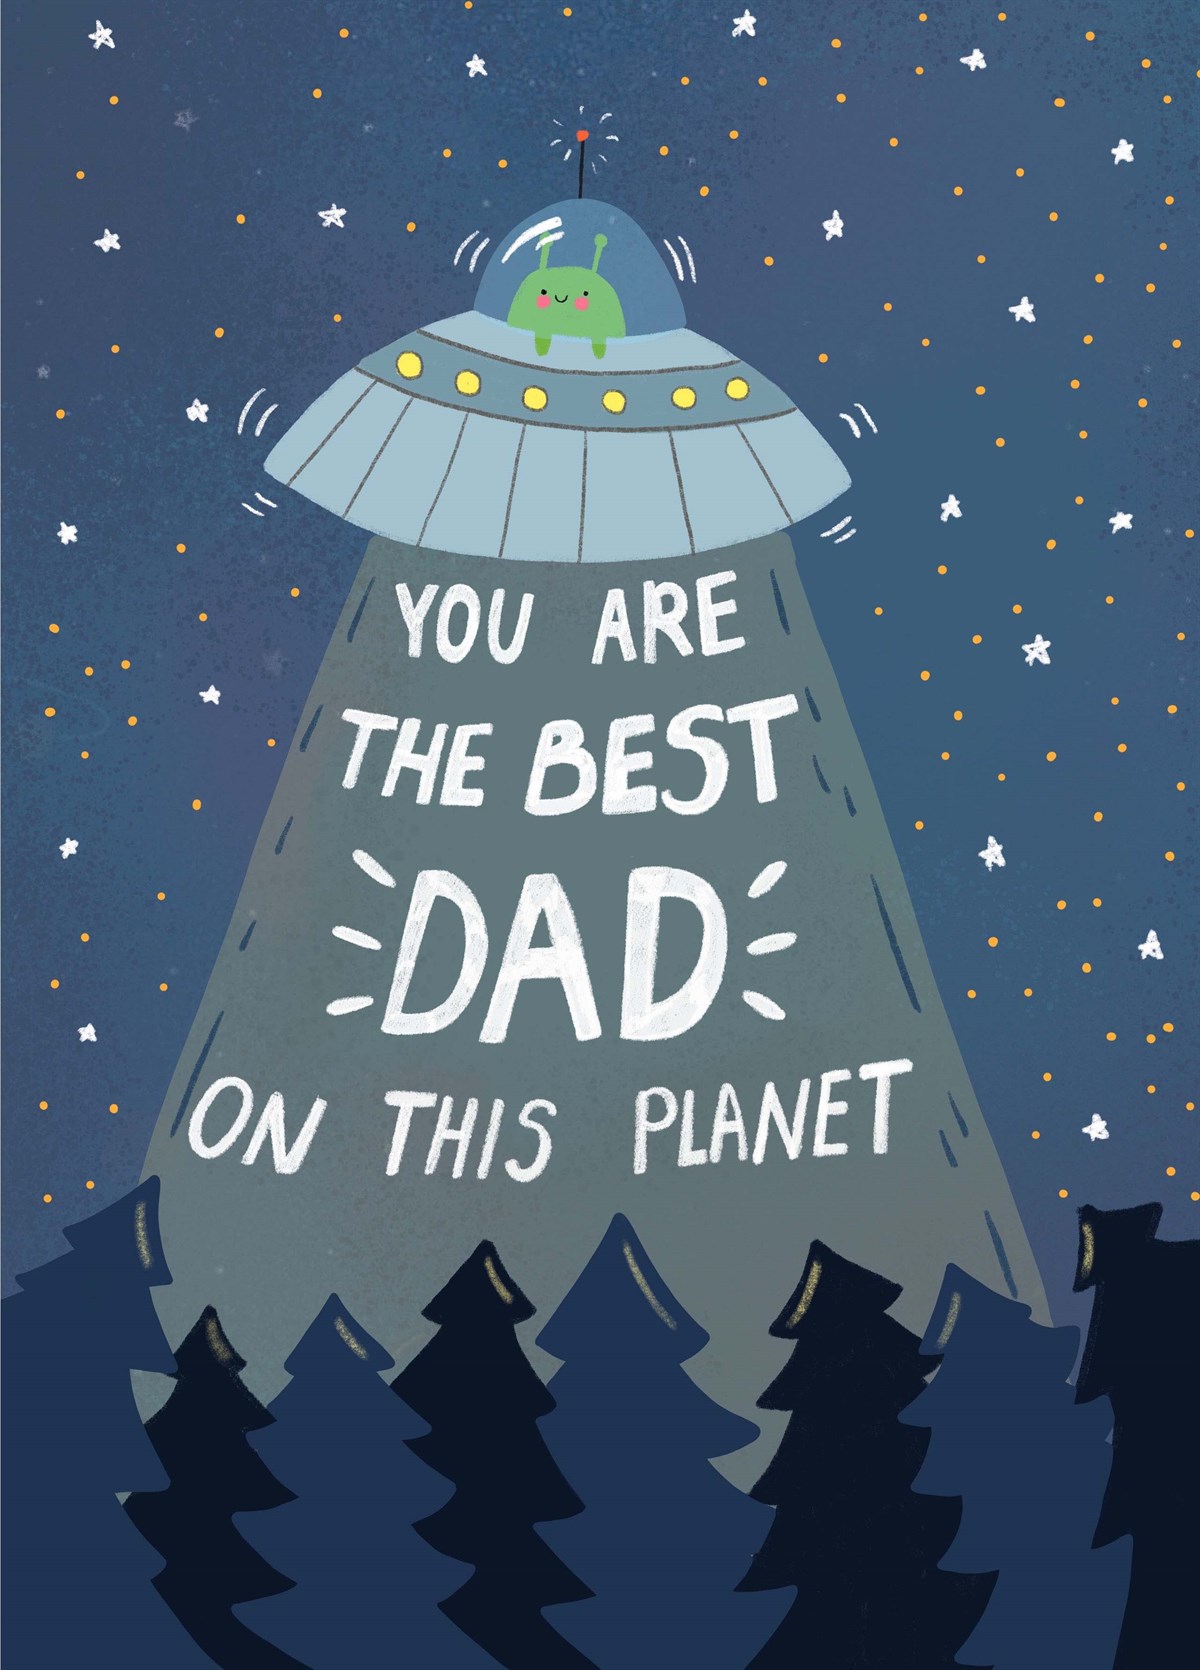 Planet Of The Dads